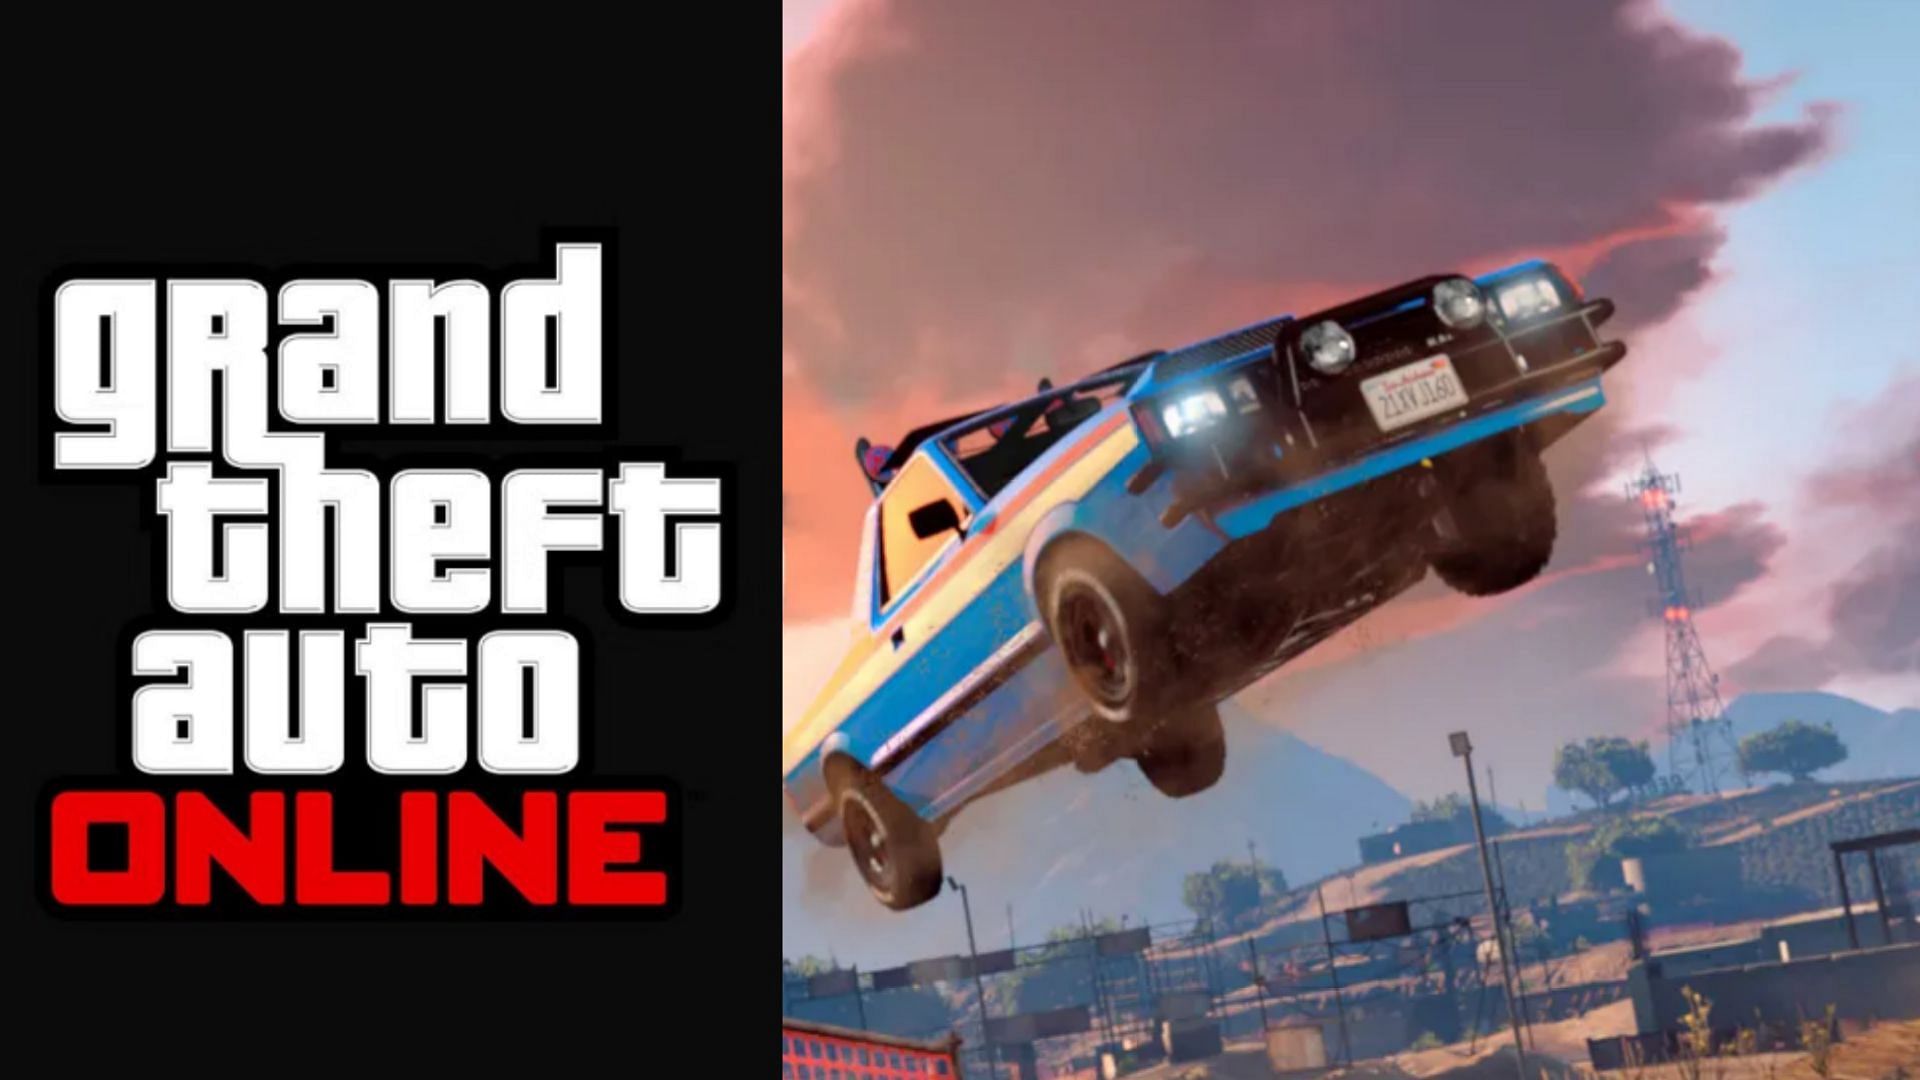 Karin Boor should be avoided by GTA Online players (Image via Rockstar Games)